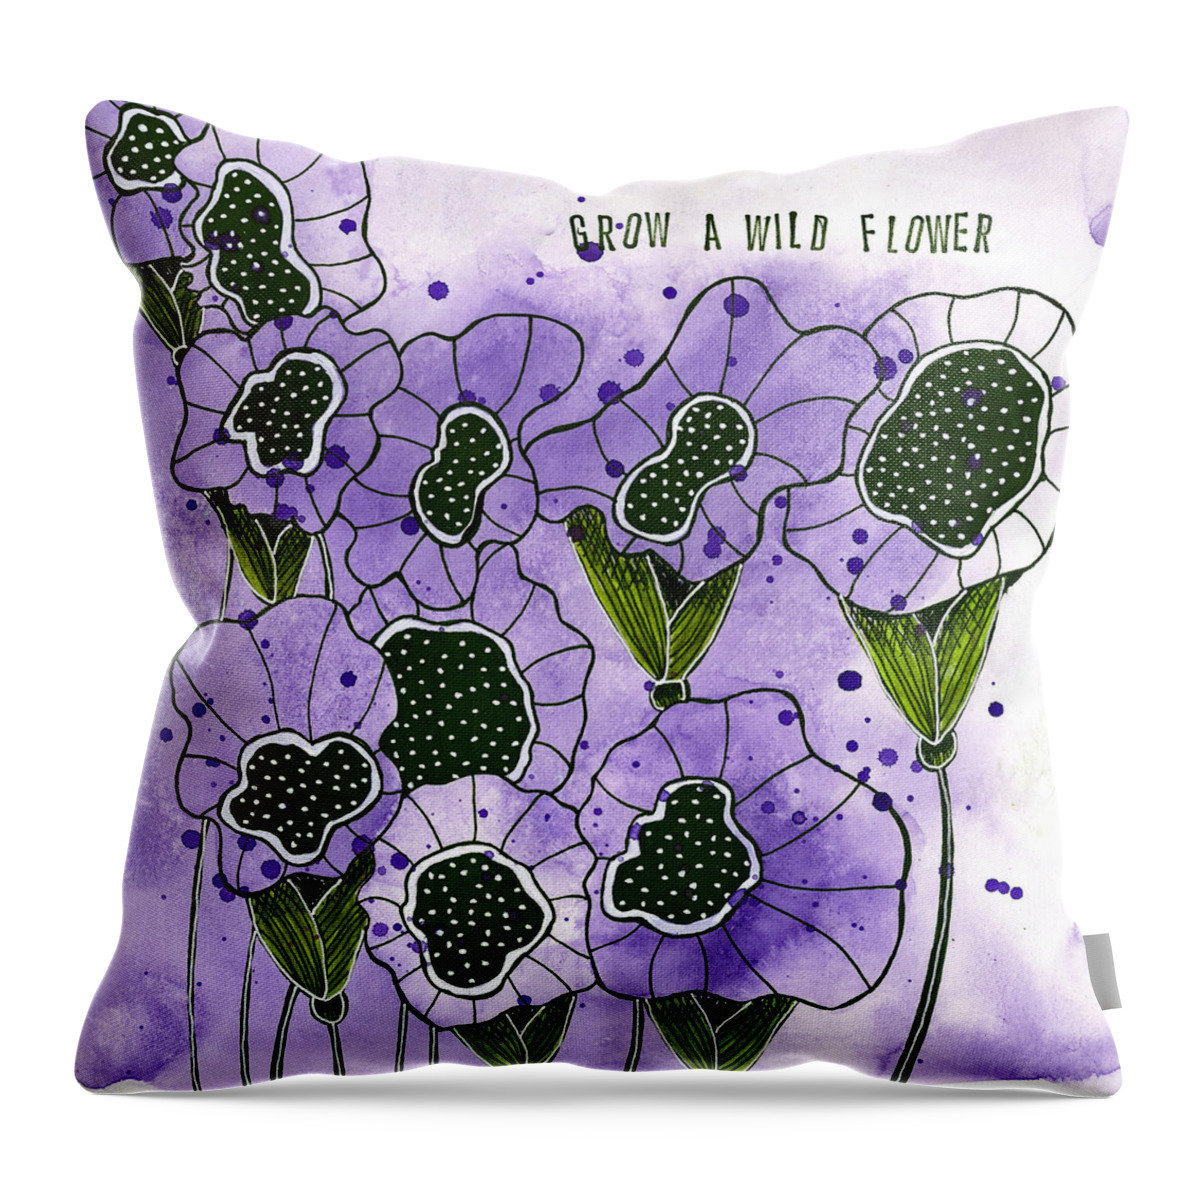 Modern Throw Pillow featuring the mixed media Grow a Wildflower by Tonya Doughty